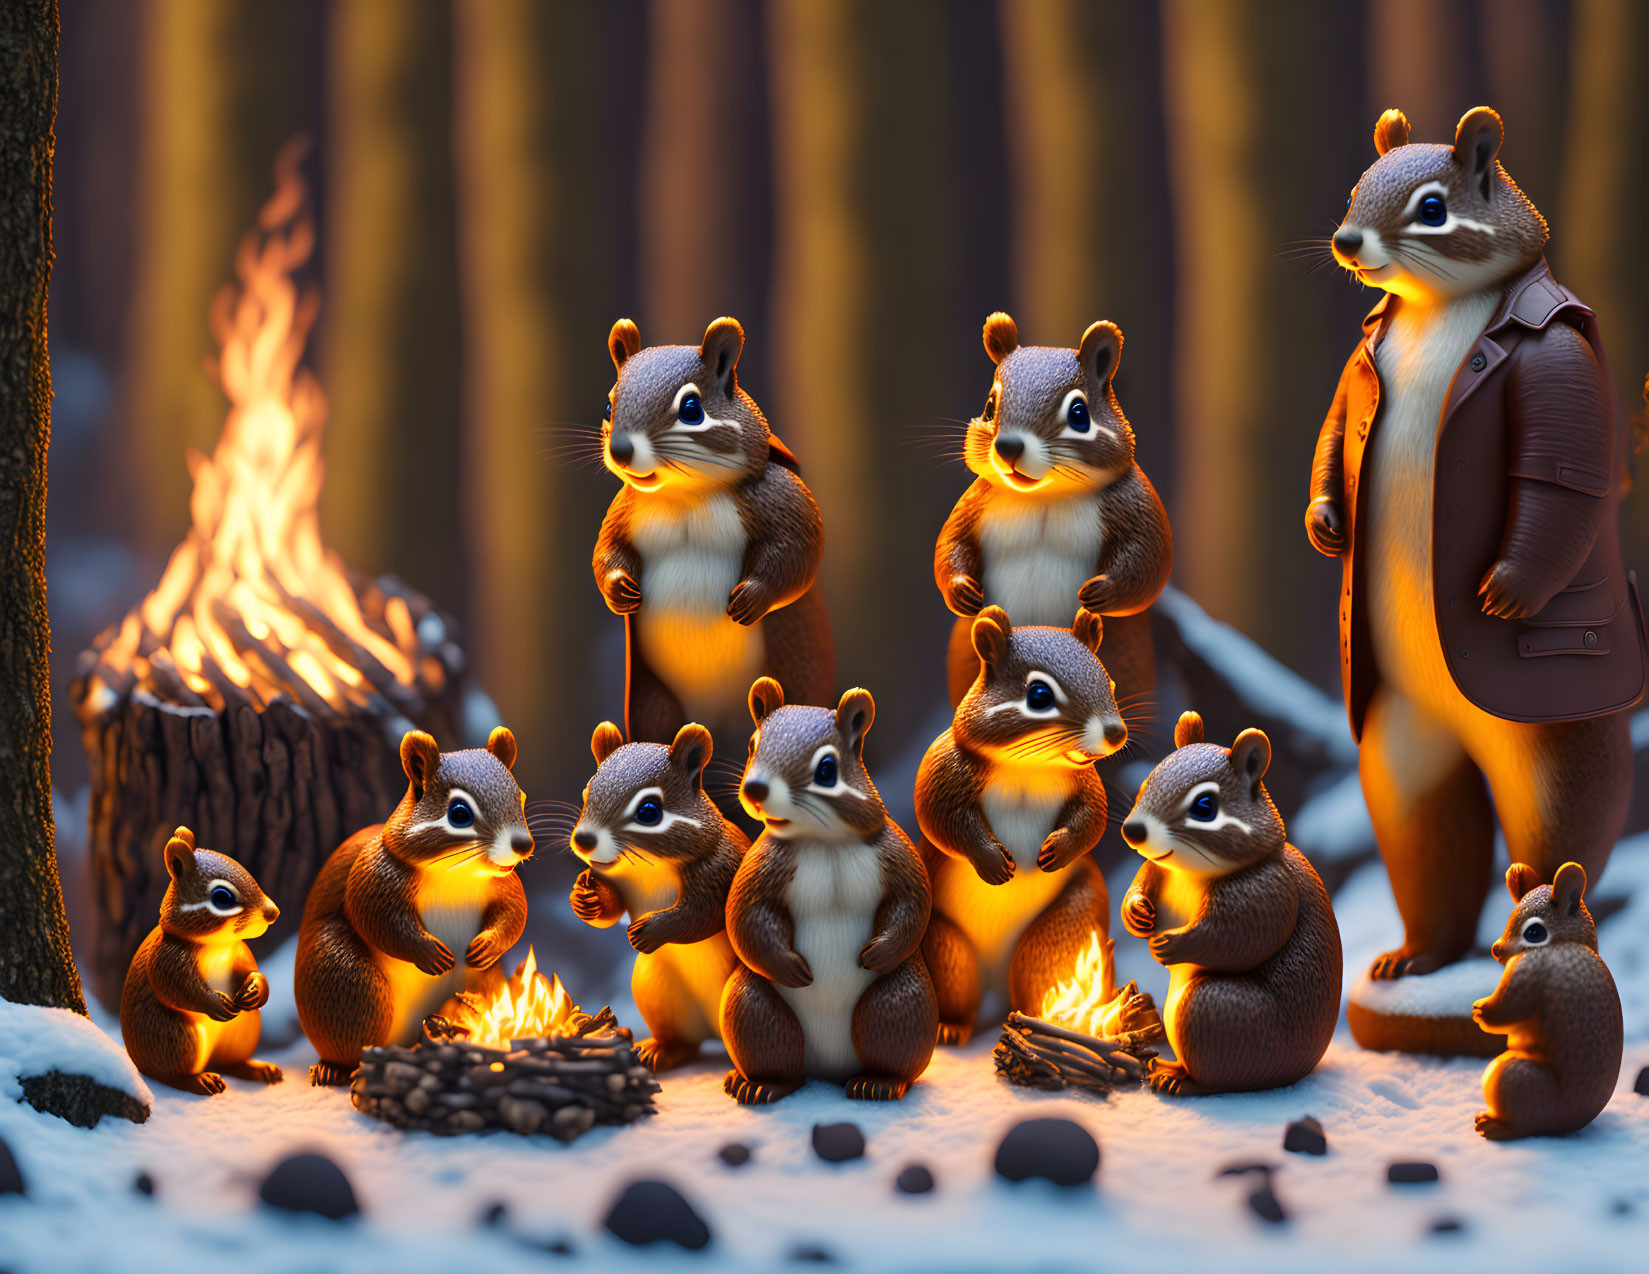 Chipmunks at Campfire in Forest: Animated Scene with Acorns